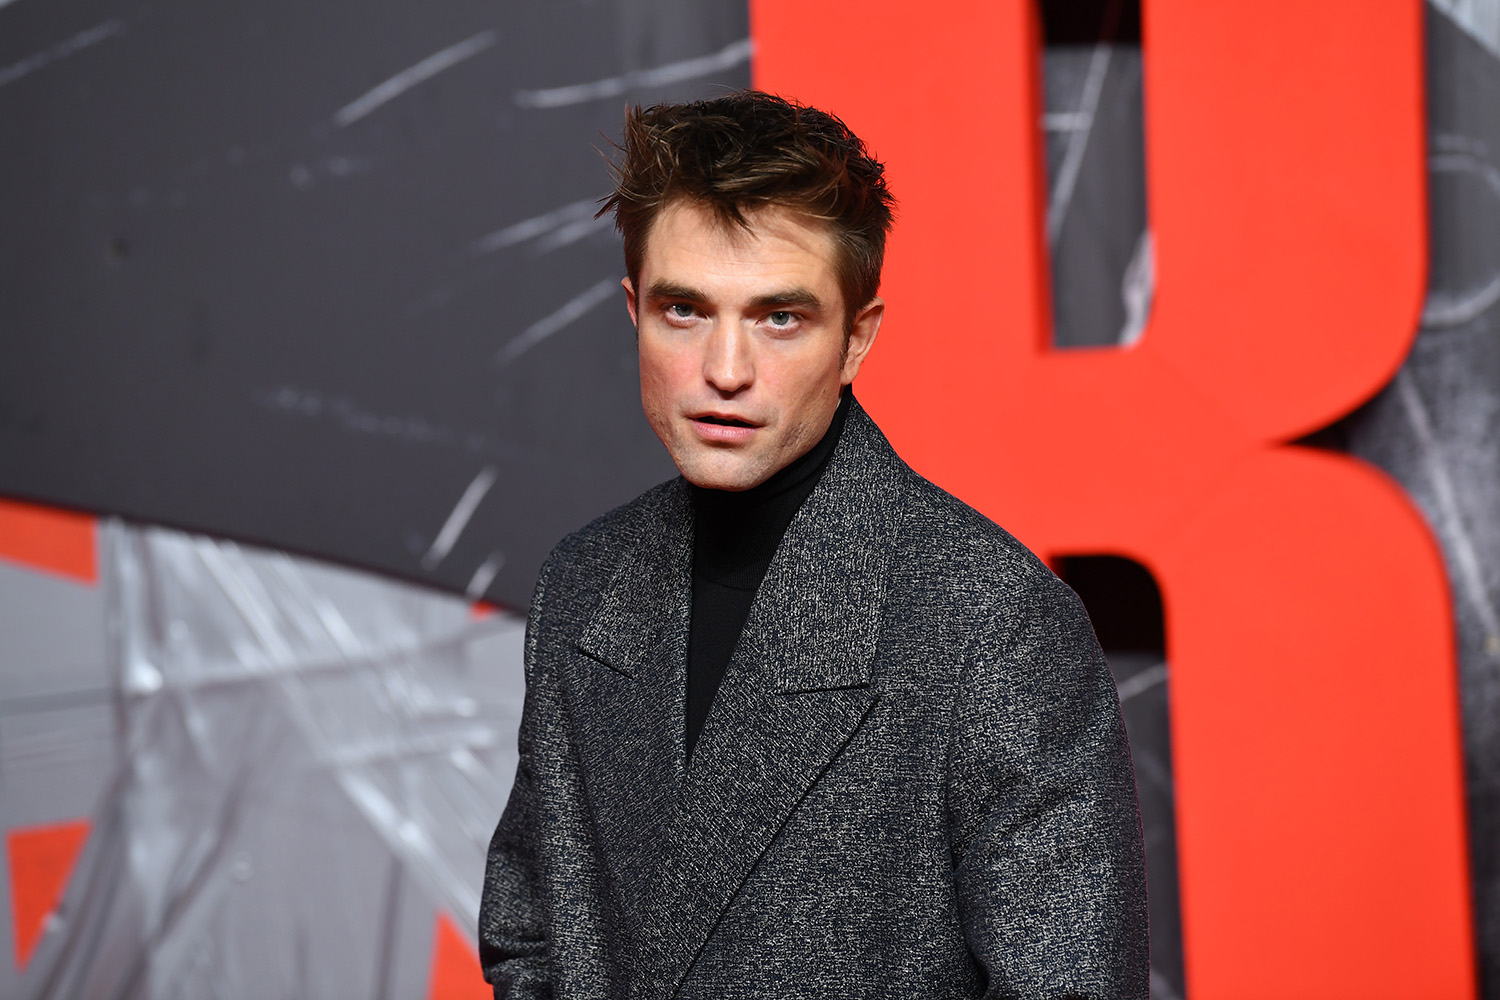 The Batman star Robert Pattinson, whose Batman villains include the Riddler and Penguin, poses in a gray coat at a screening in London.